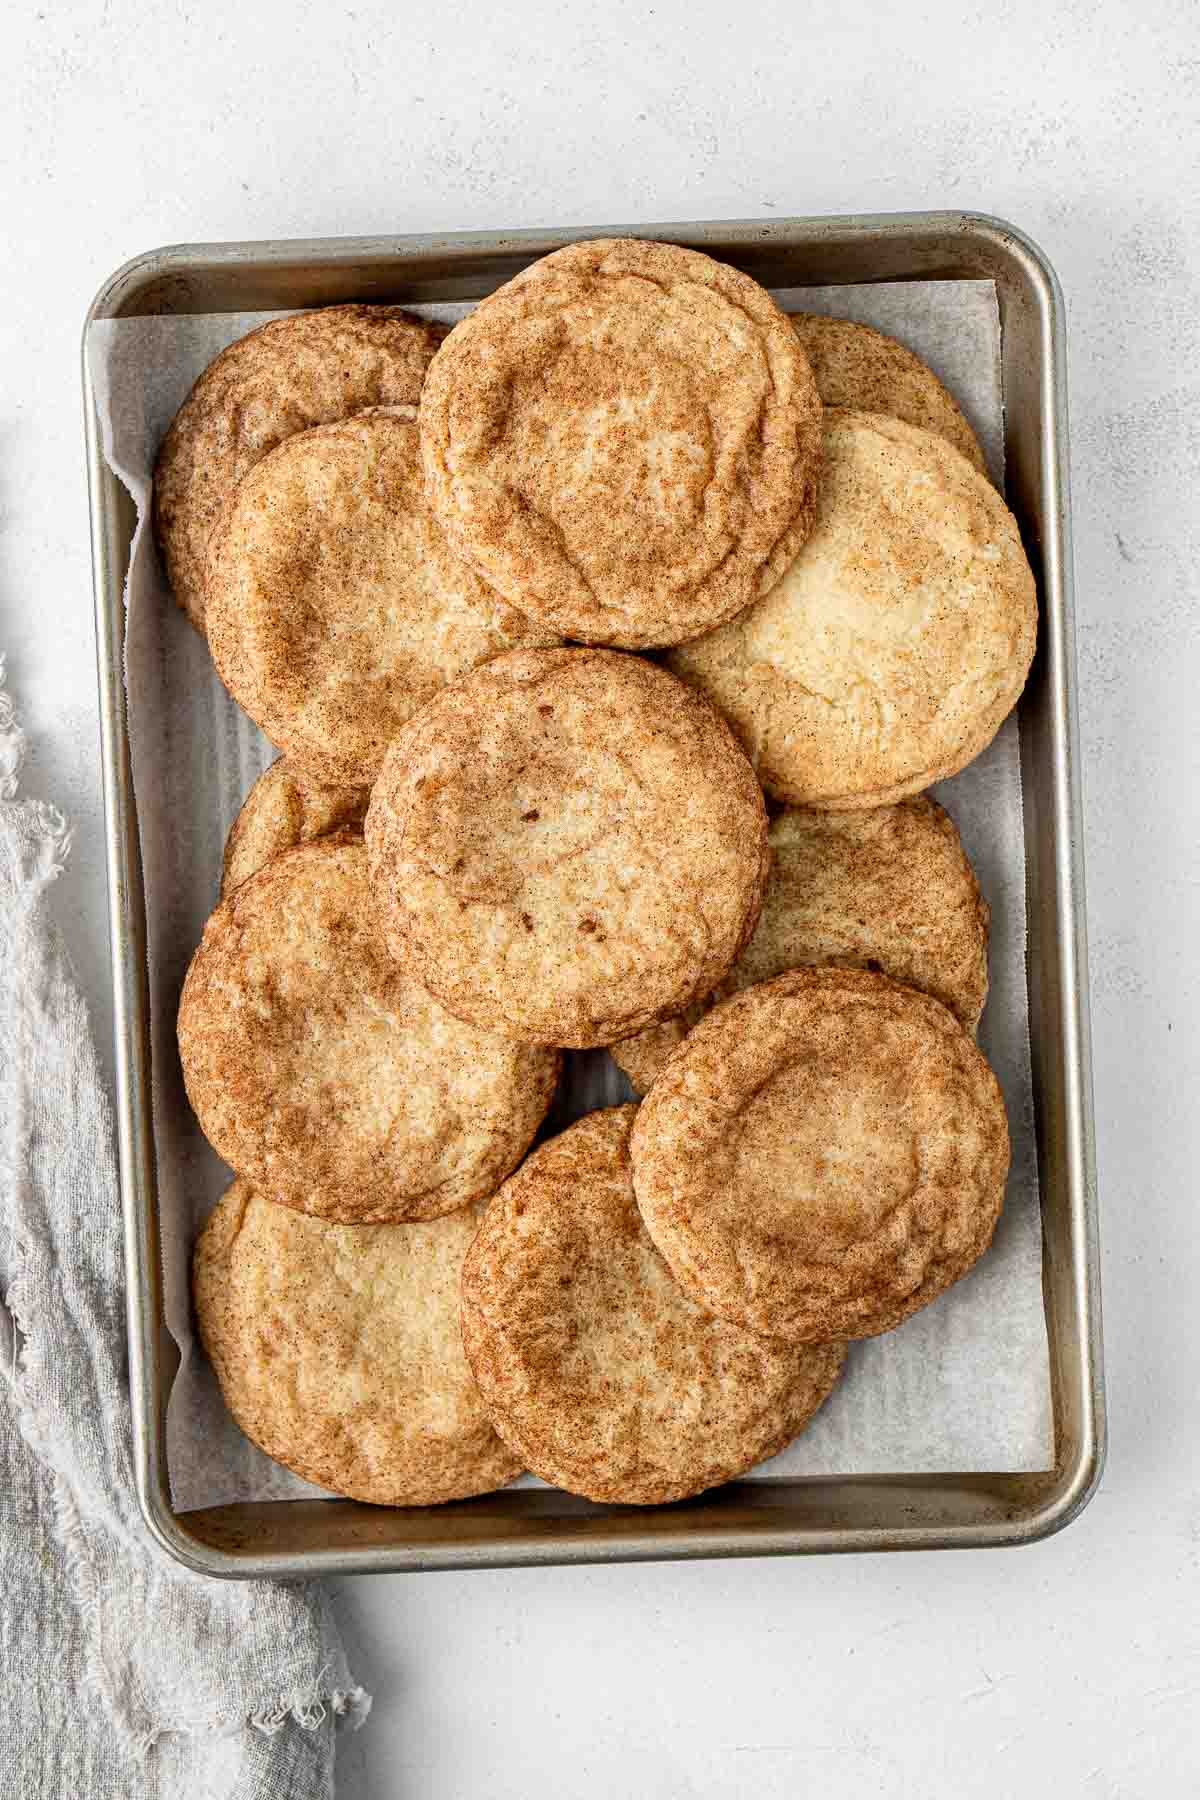 A baking tray of snickerdoodle cookies.